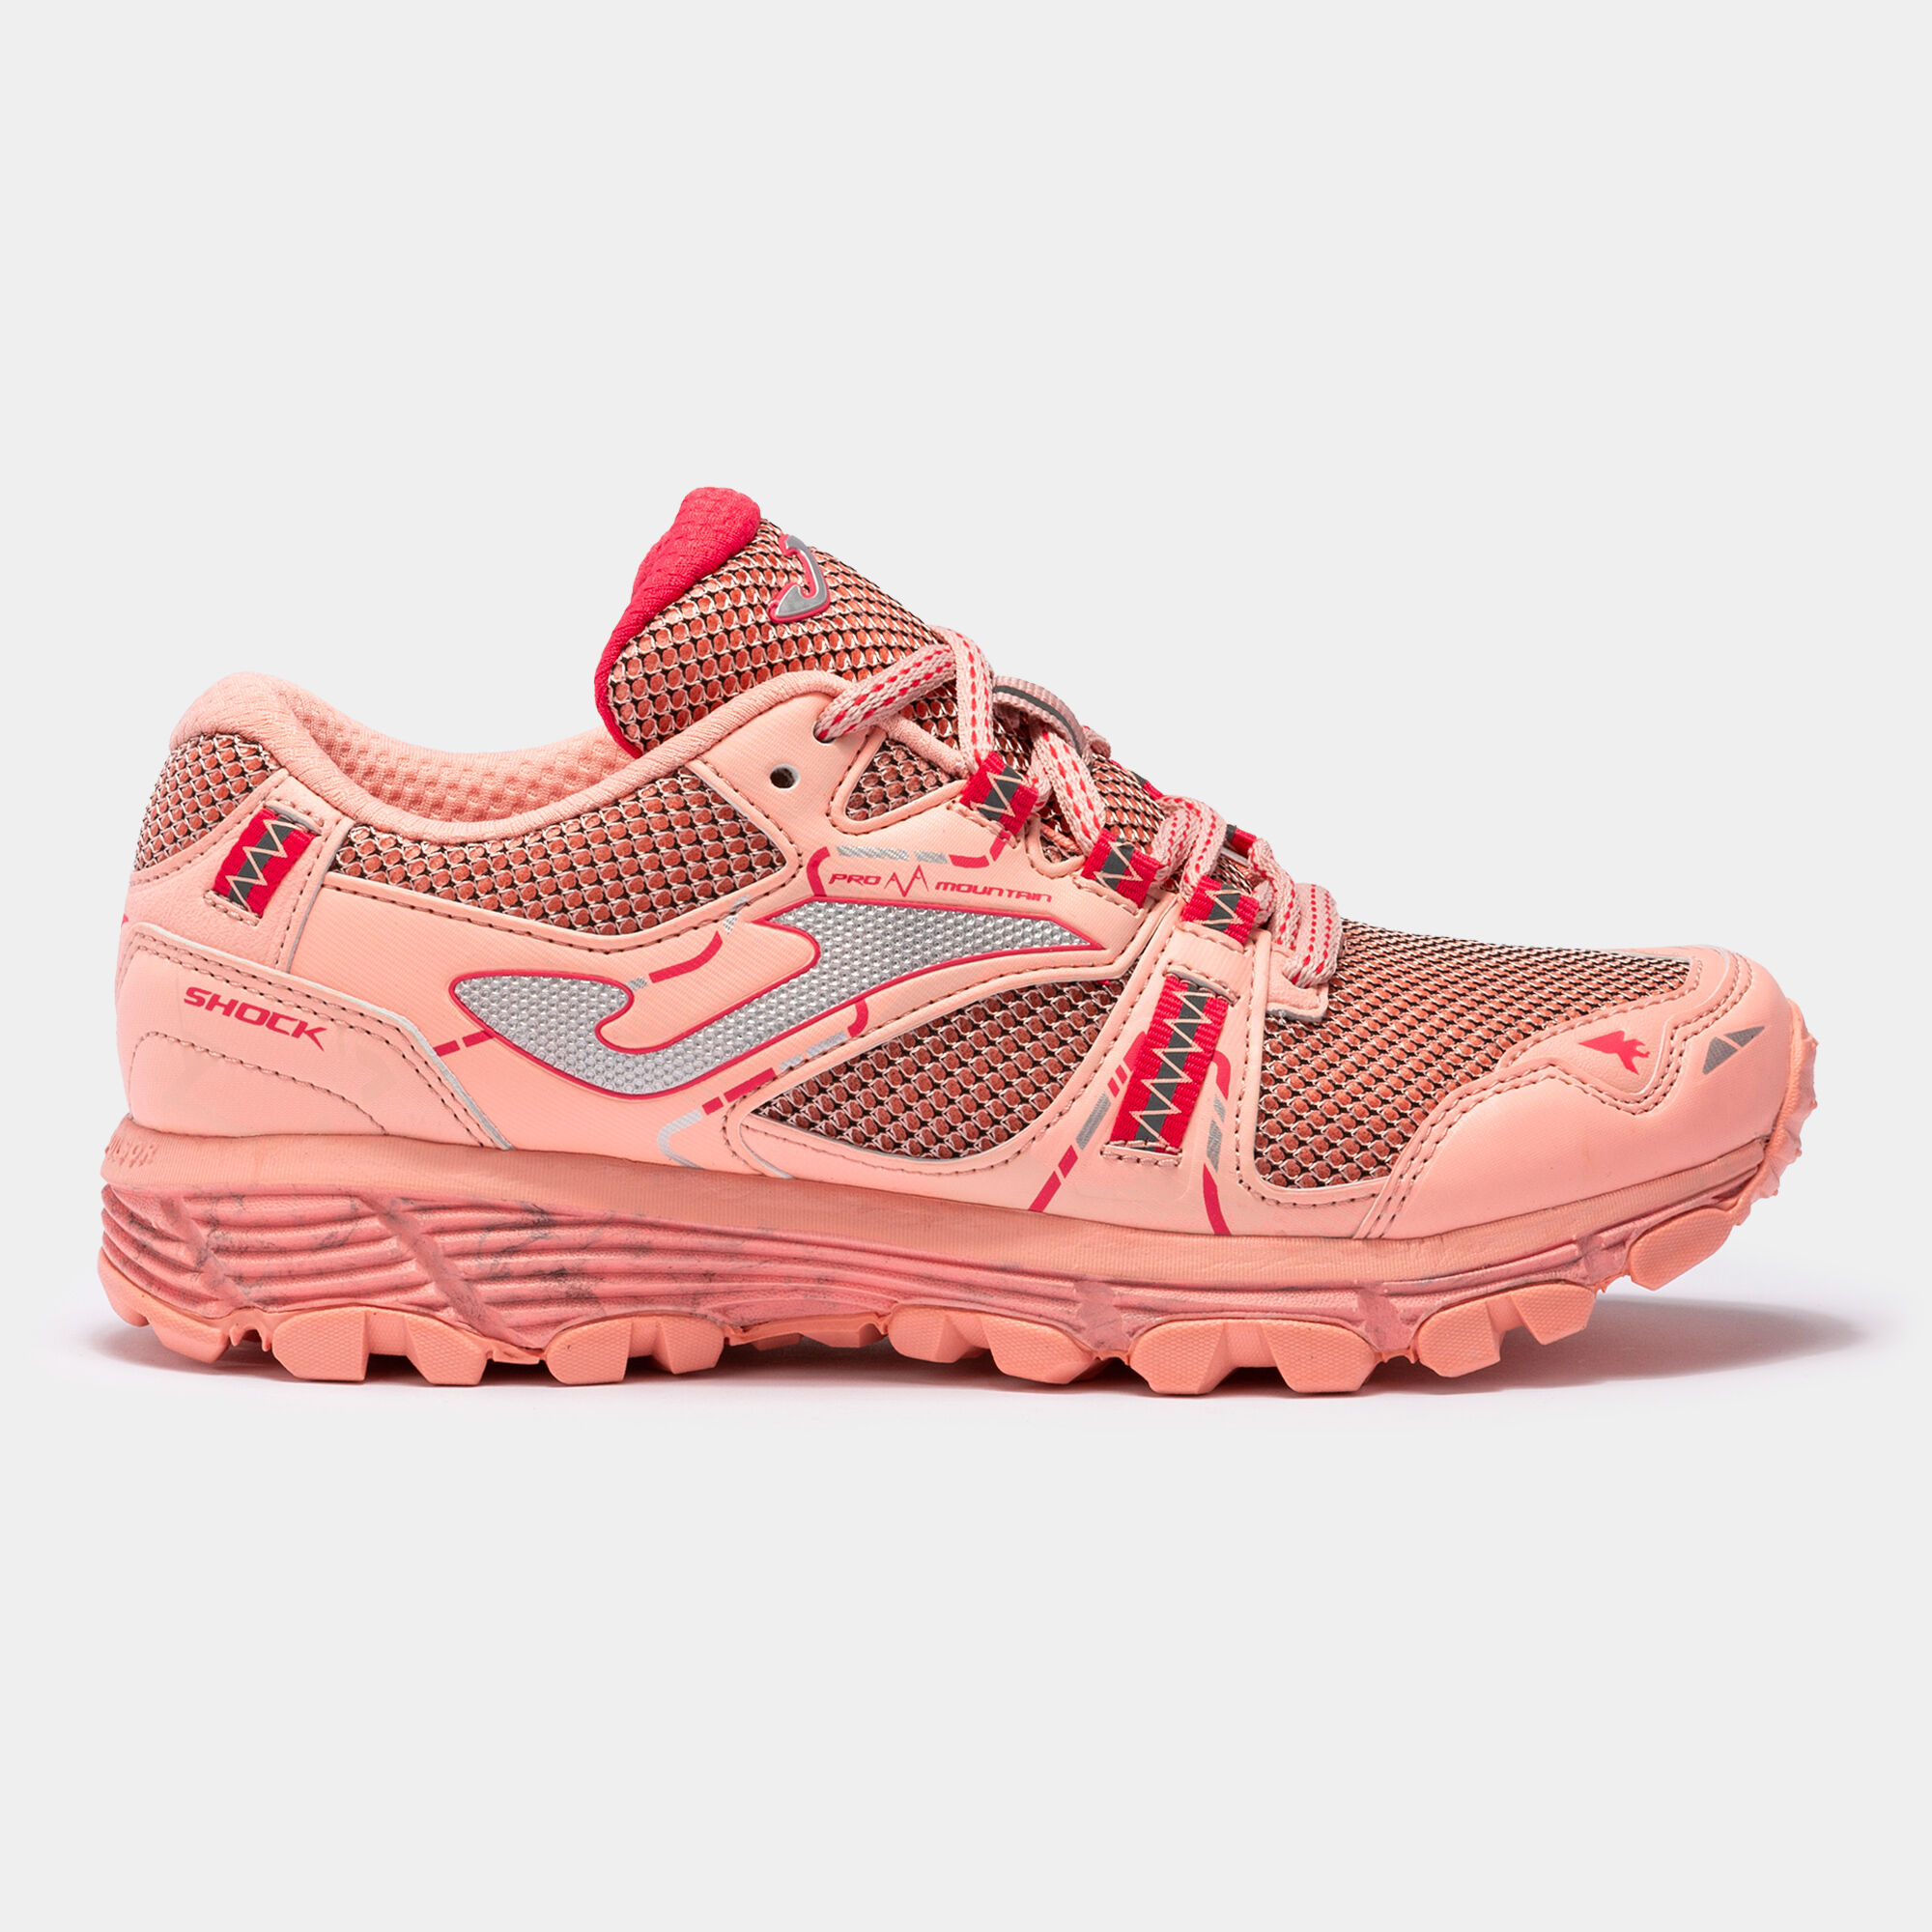 Trail-running shoes 22 woman pink gray